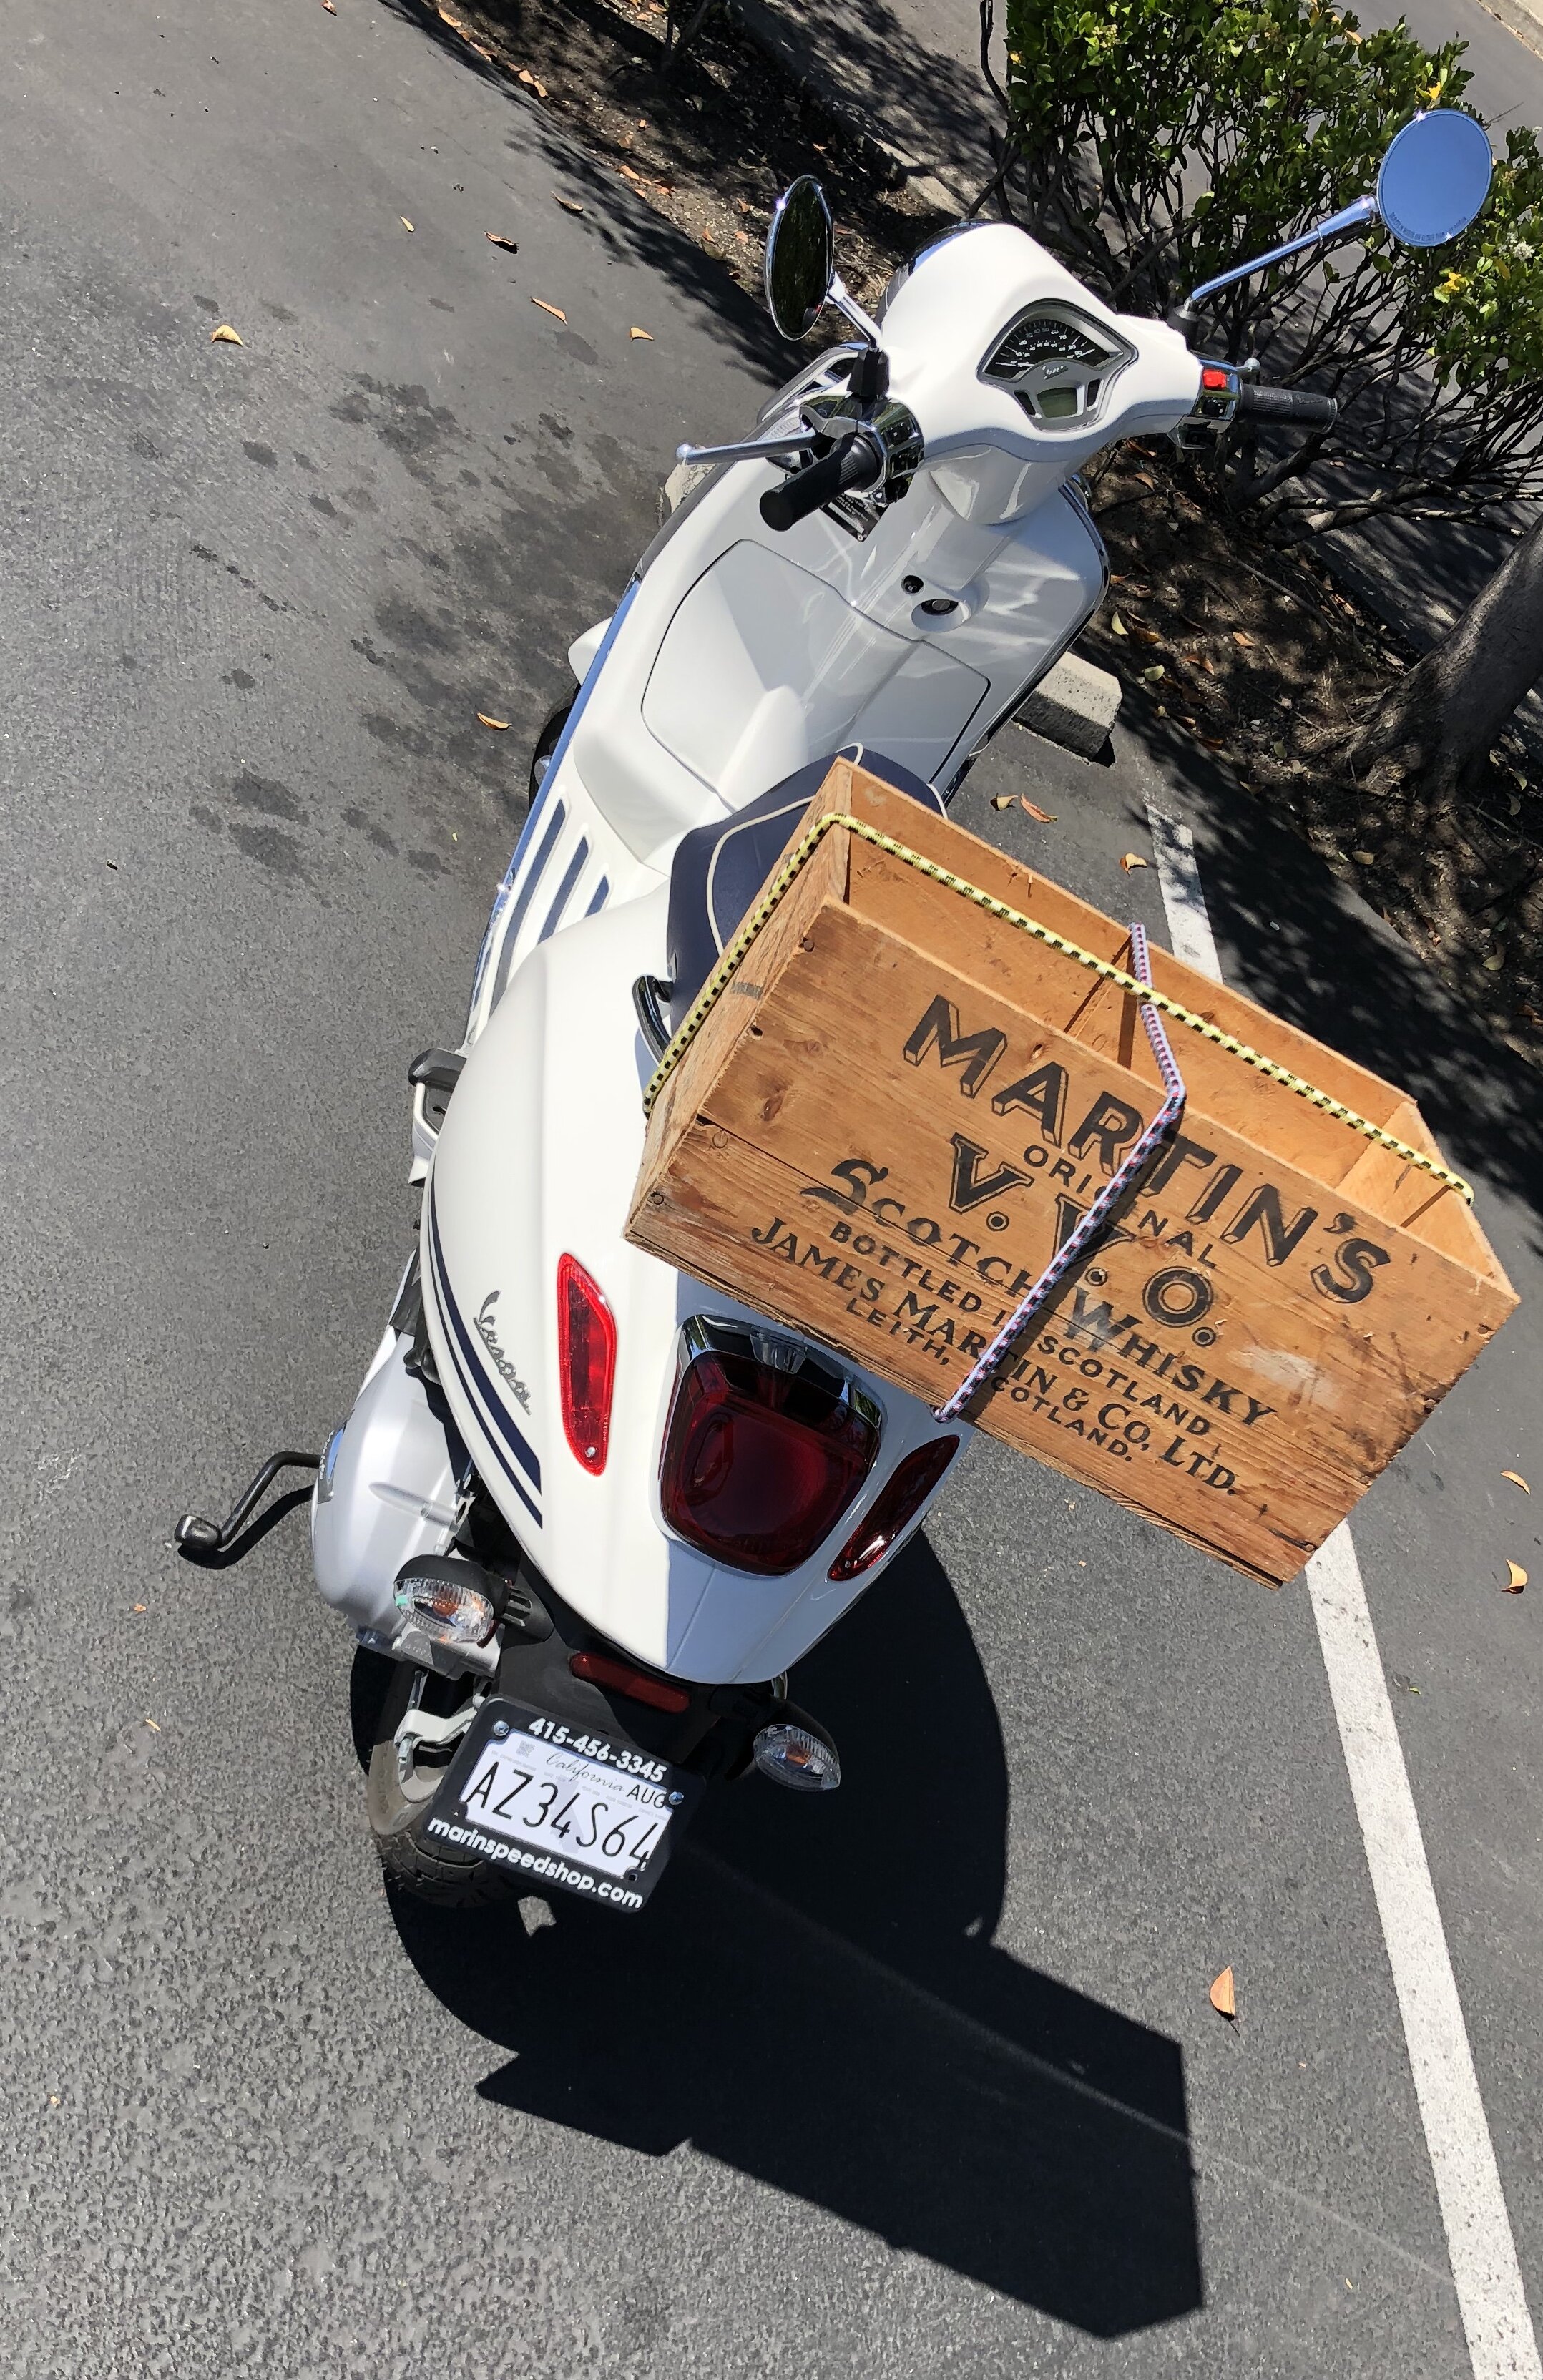 The owner of the new Vespa said the MARTIN'S box had been her dad's.